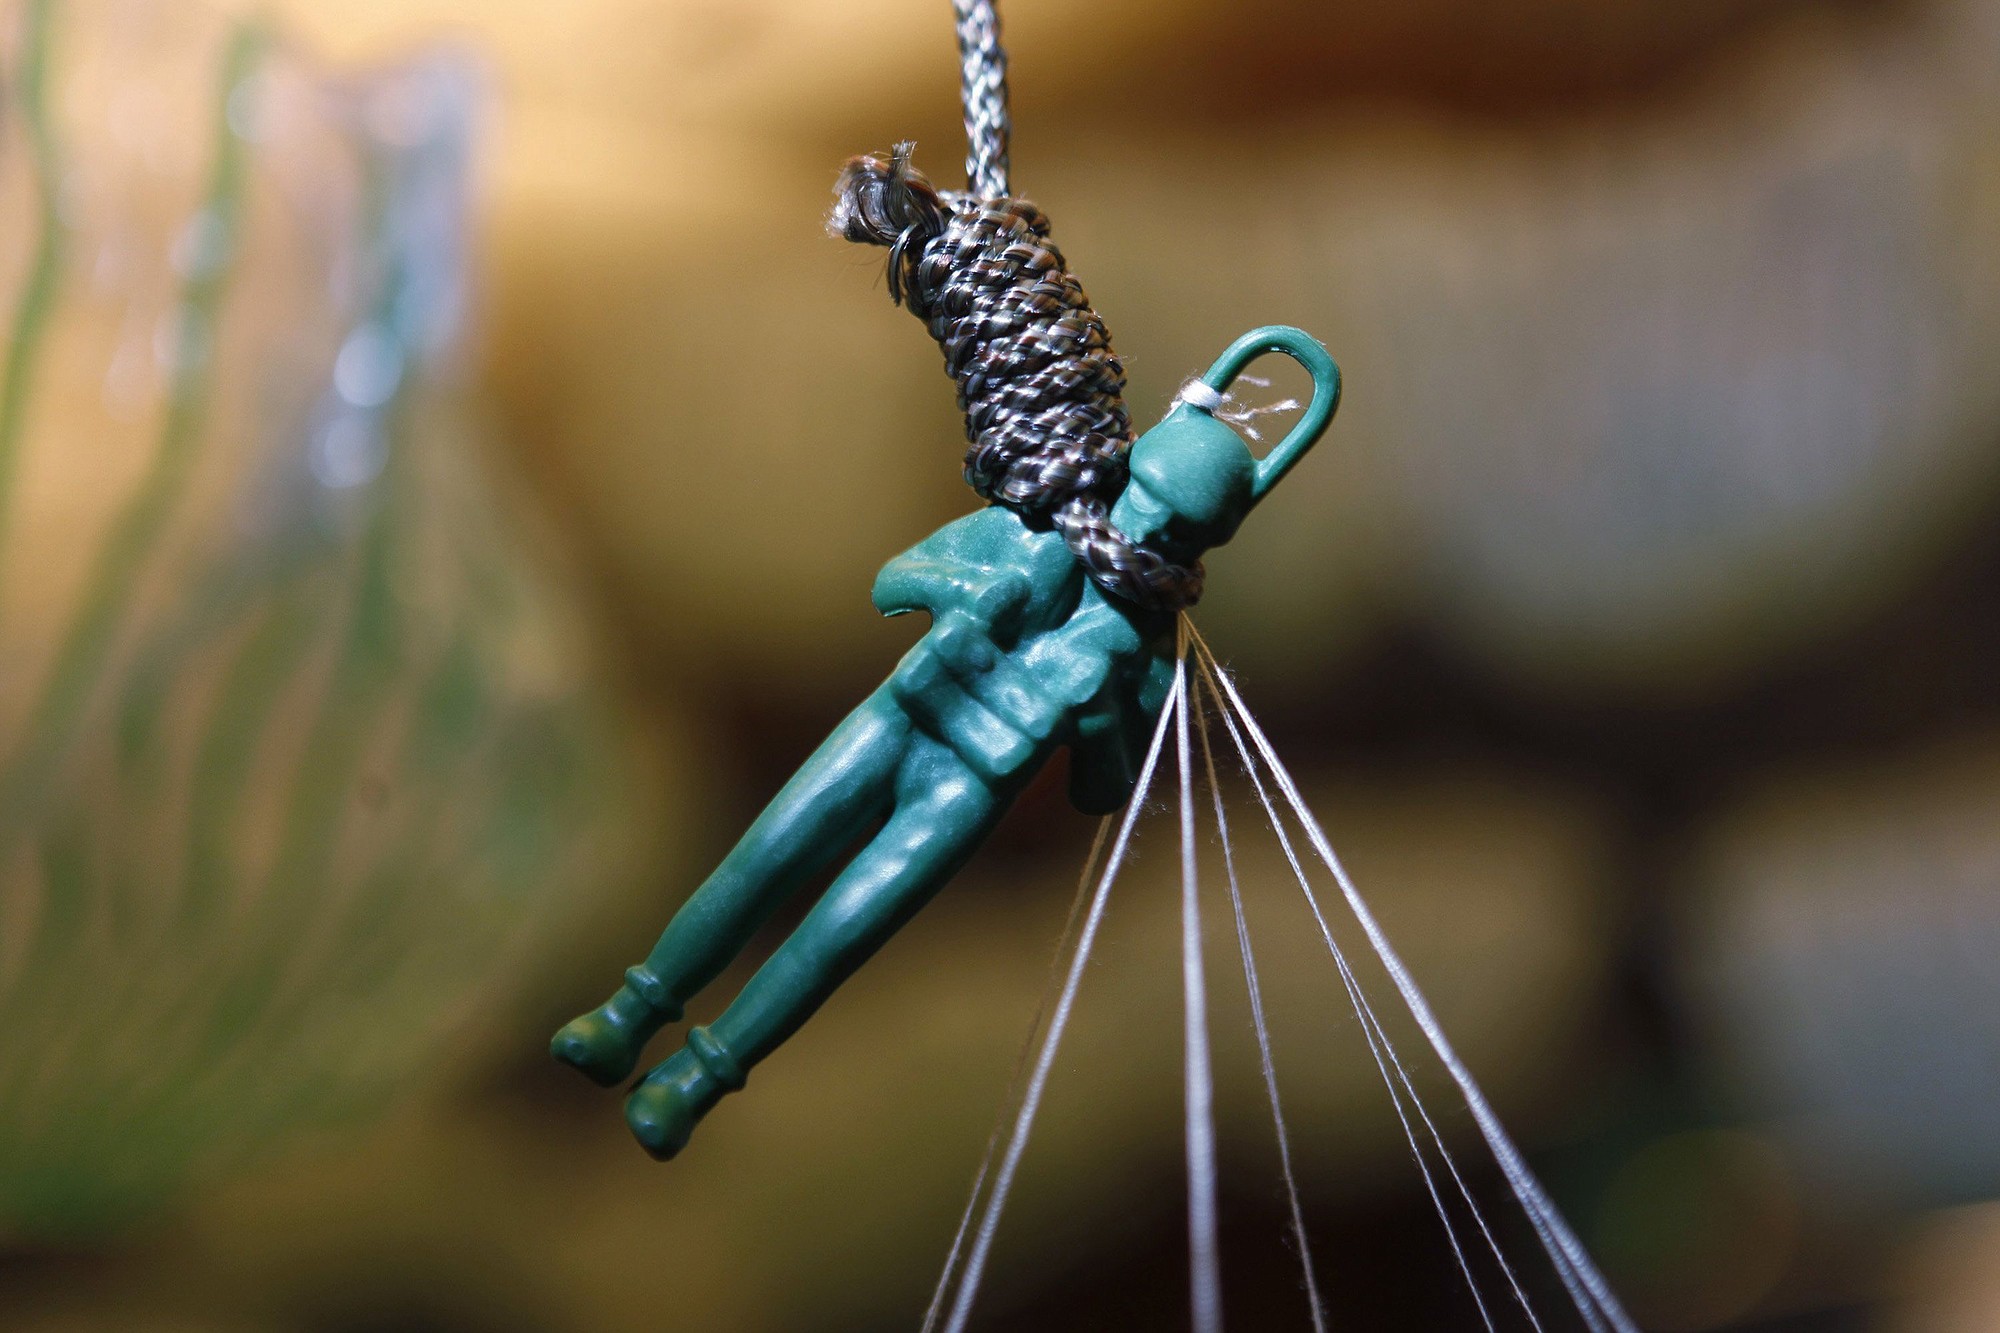 A hanging toy soldier represents veterans suicides in an art installation by Mark Pinto at San Jose Martin Luther King Library in San Jose, Calif.